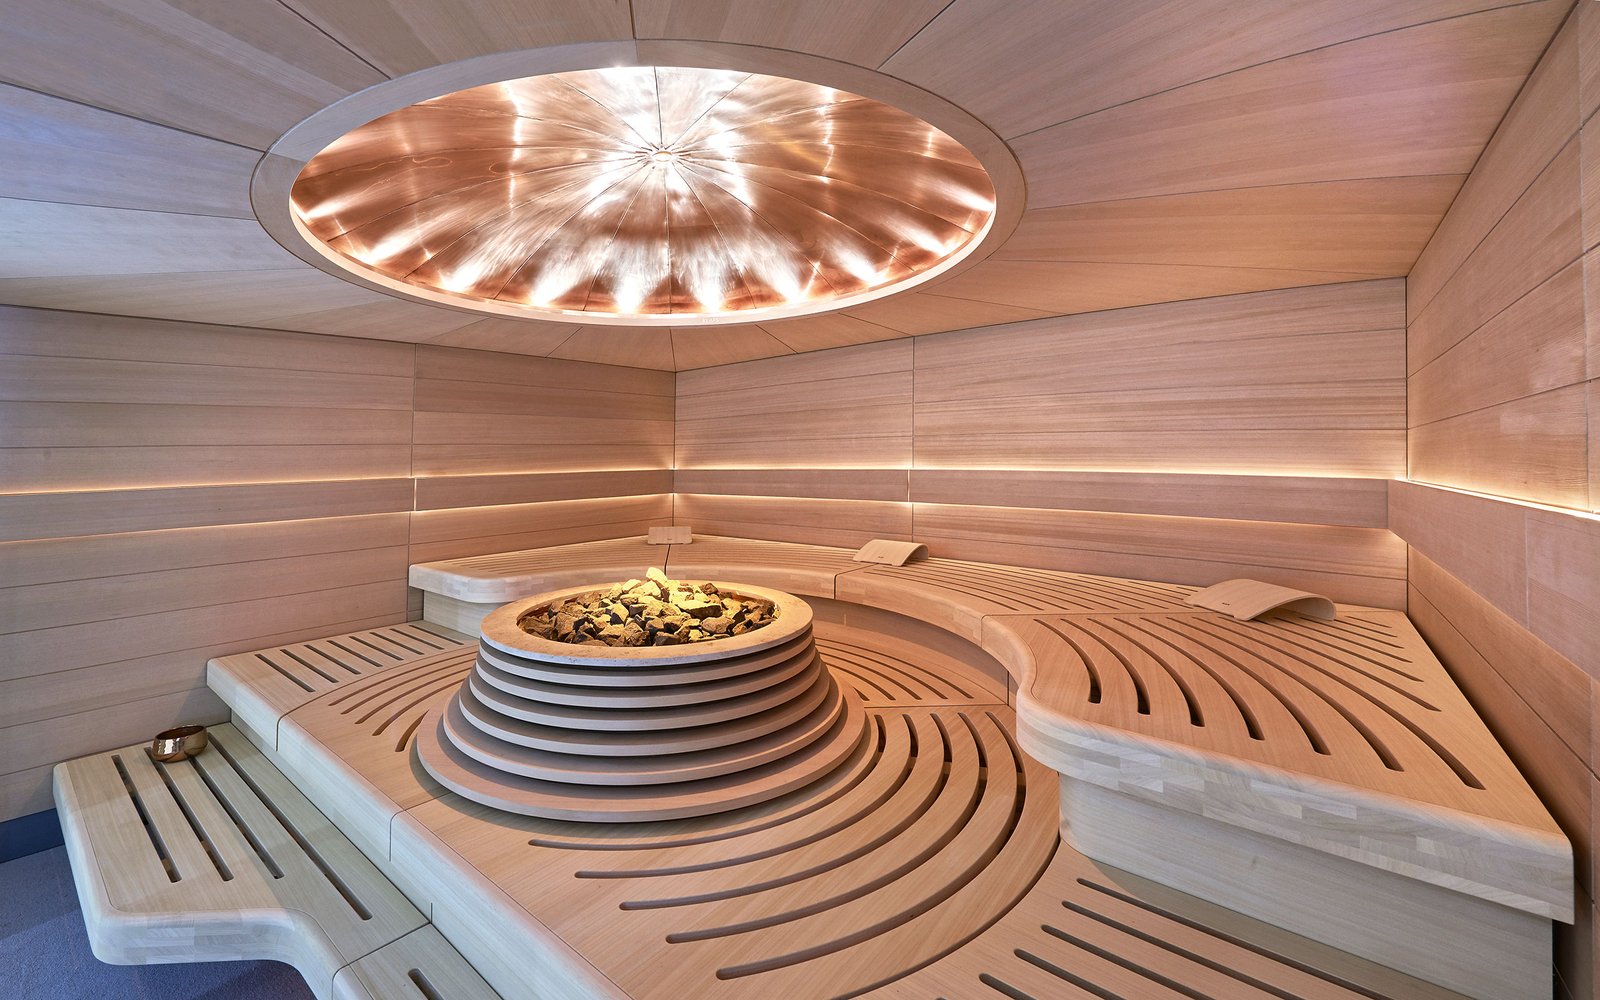 Why Should You Install A Sauna Heater That Burns Wood?